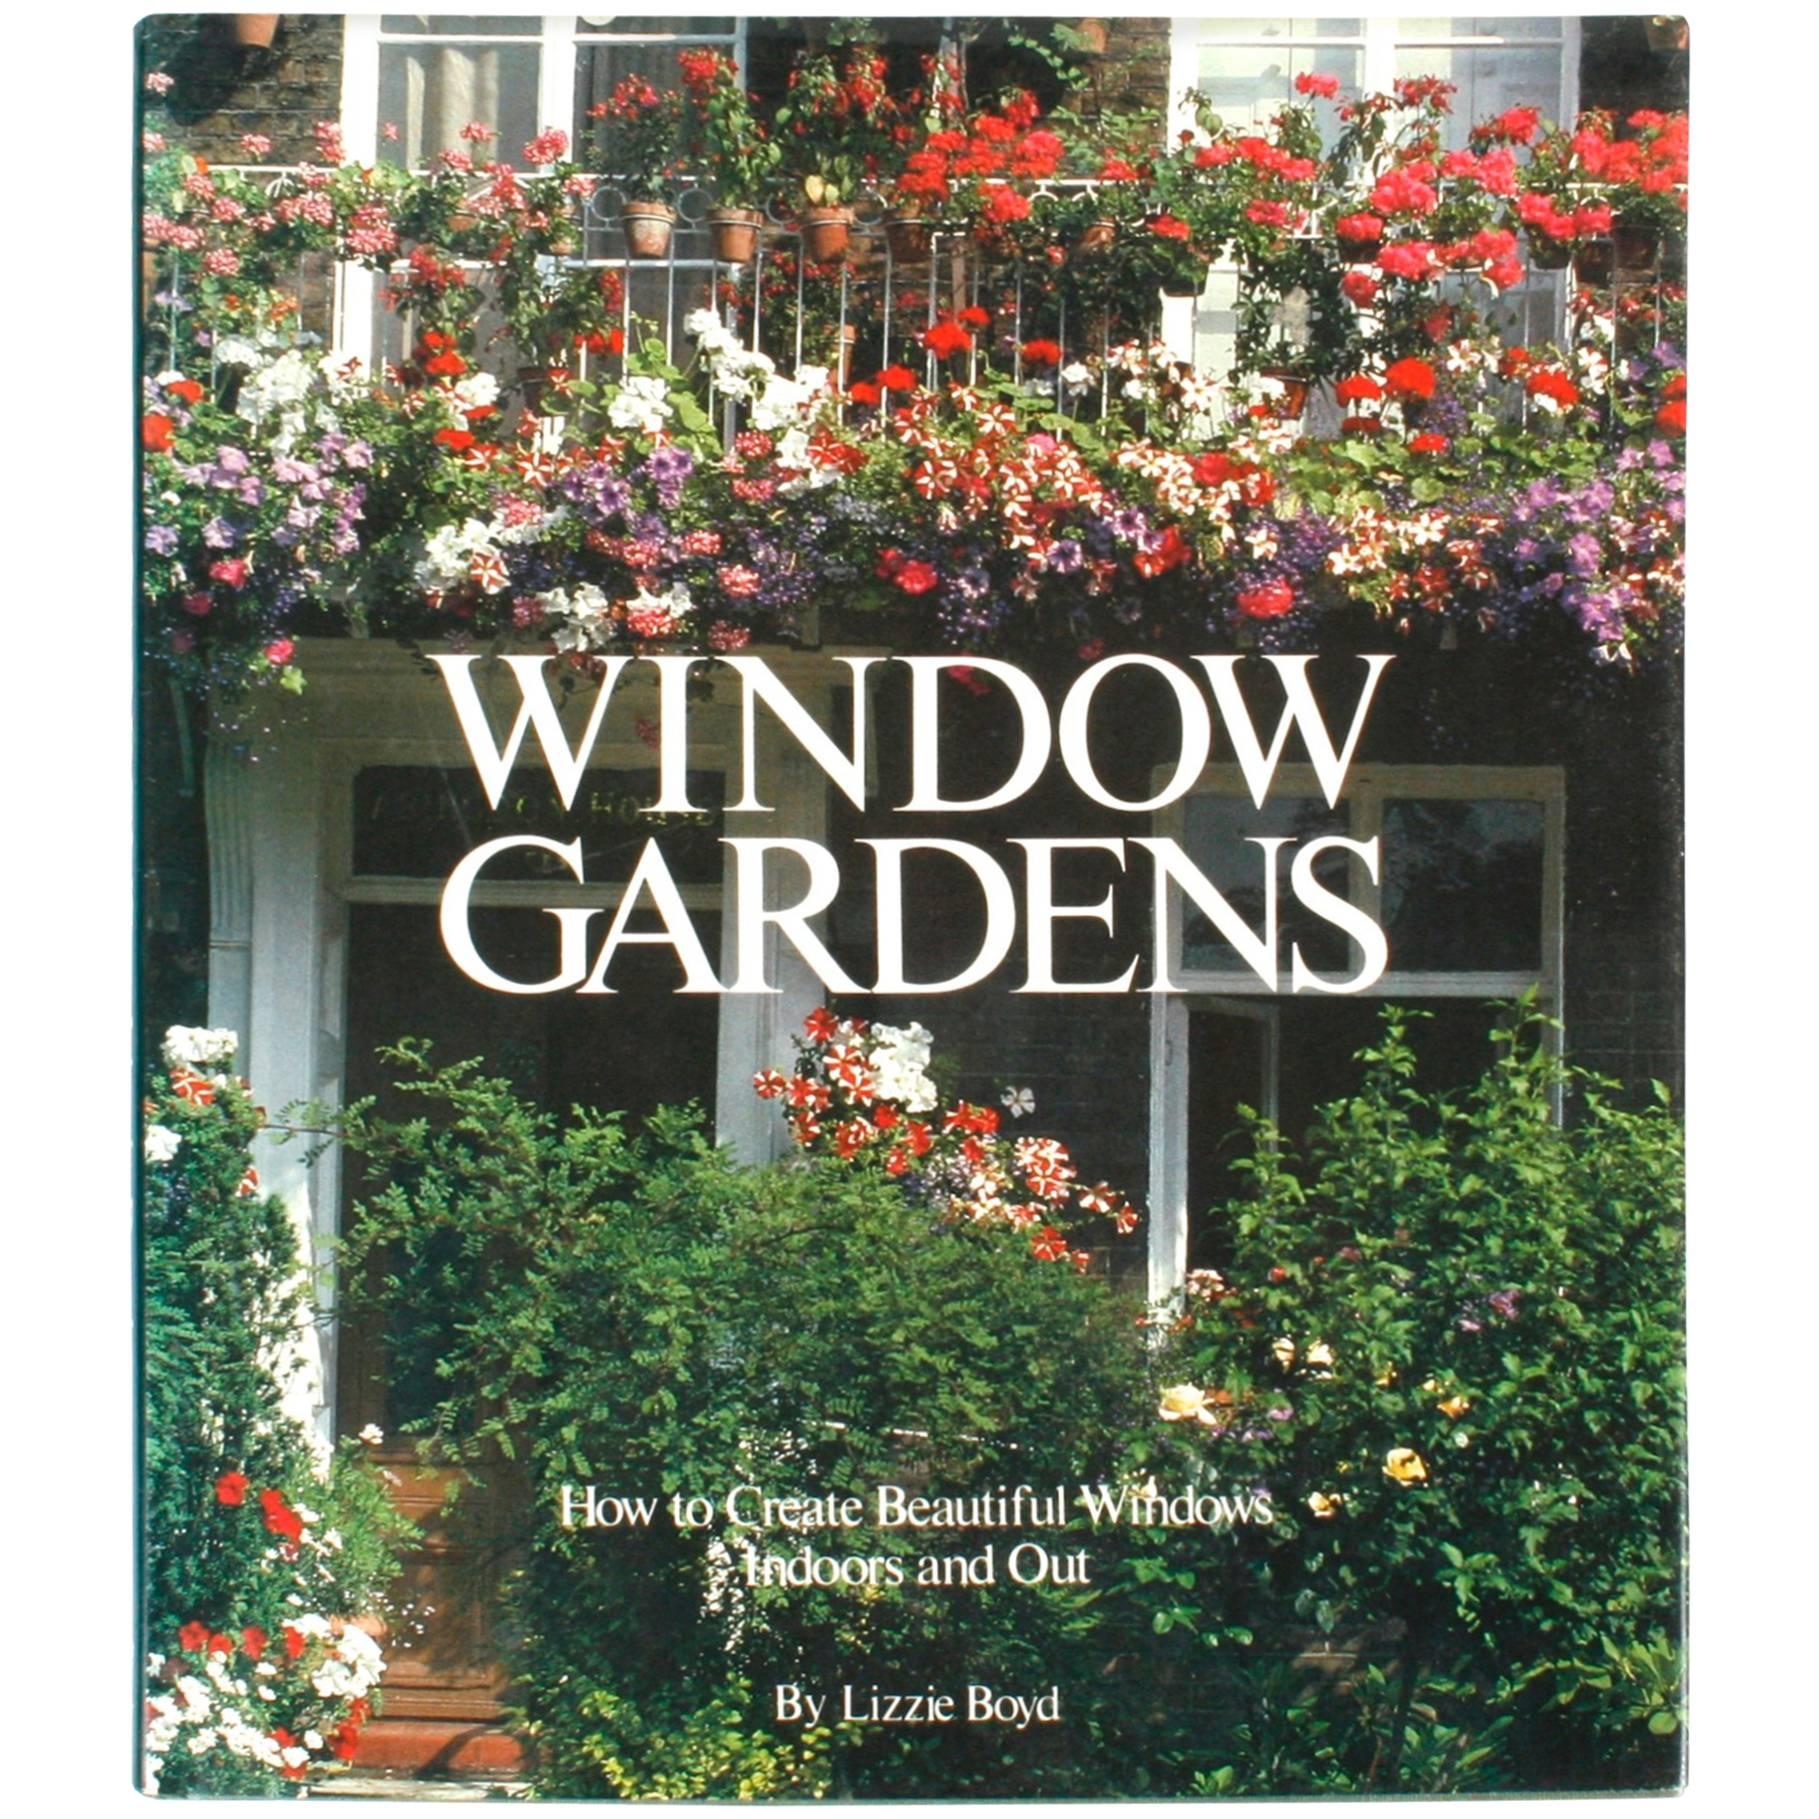 Window Gardens, How to Create Beautiful Windows Indoors and Out